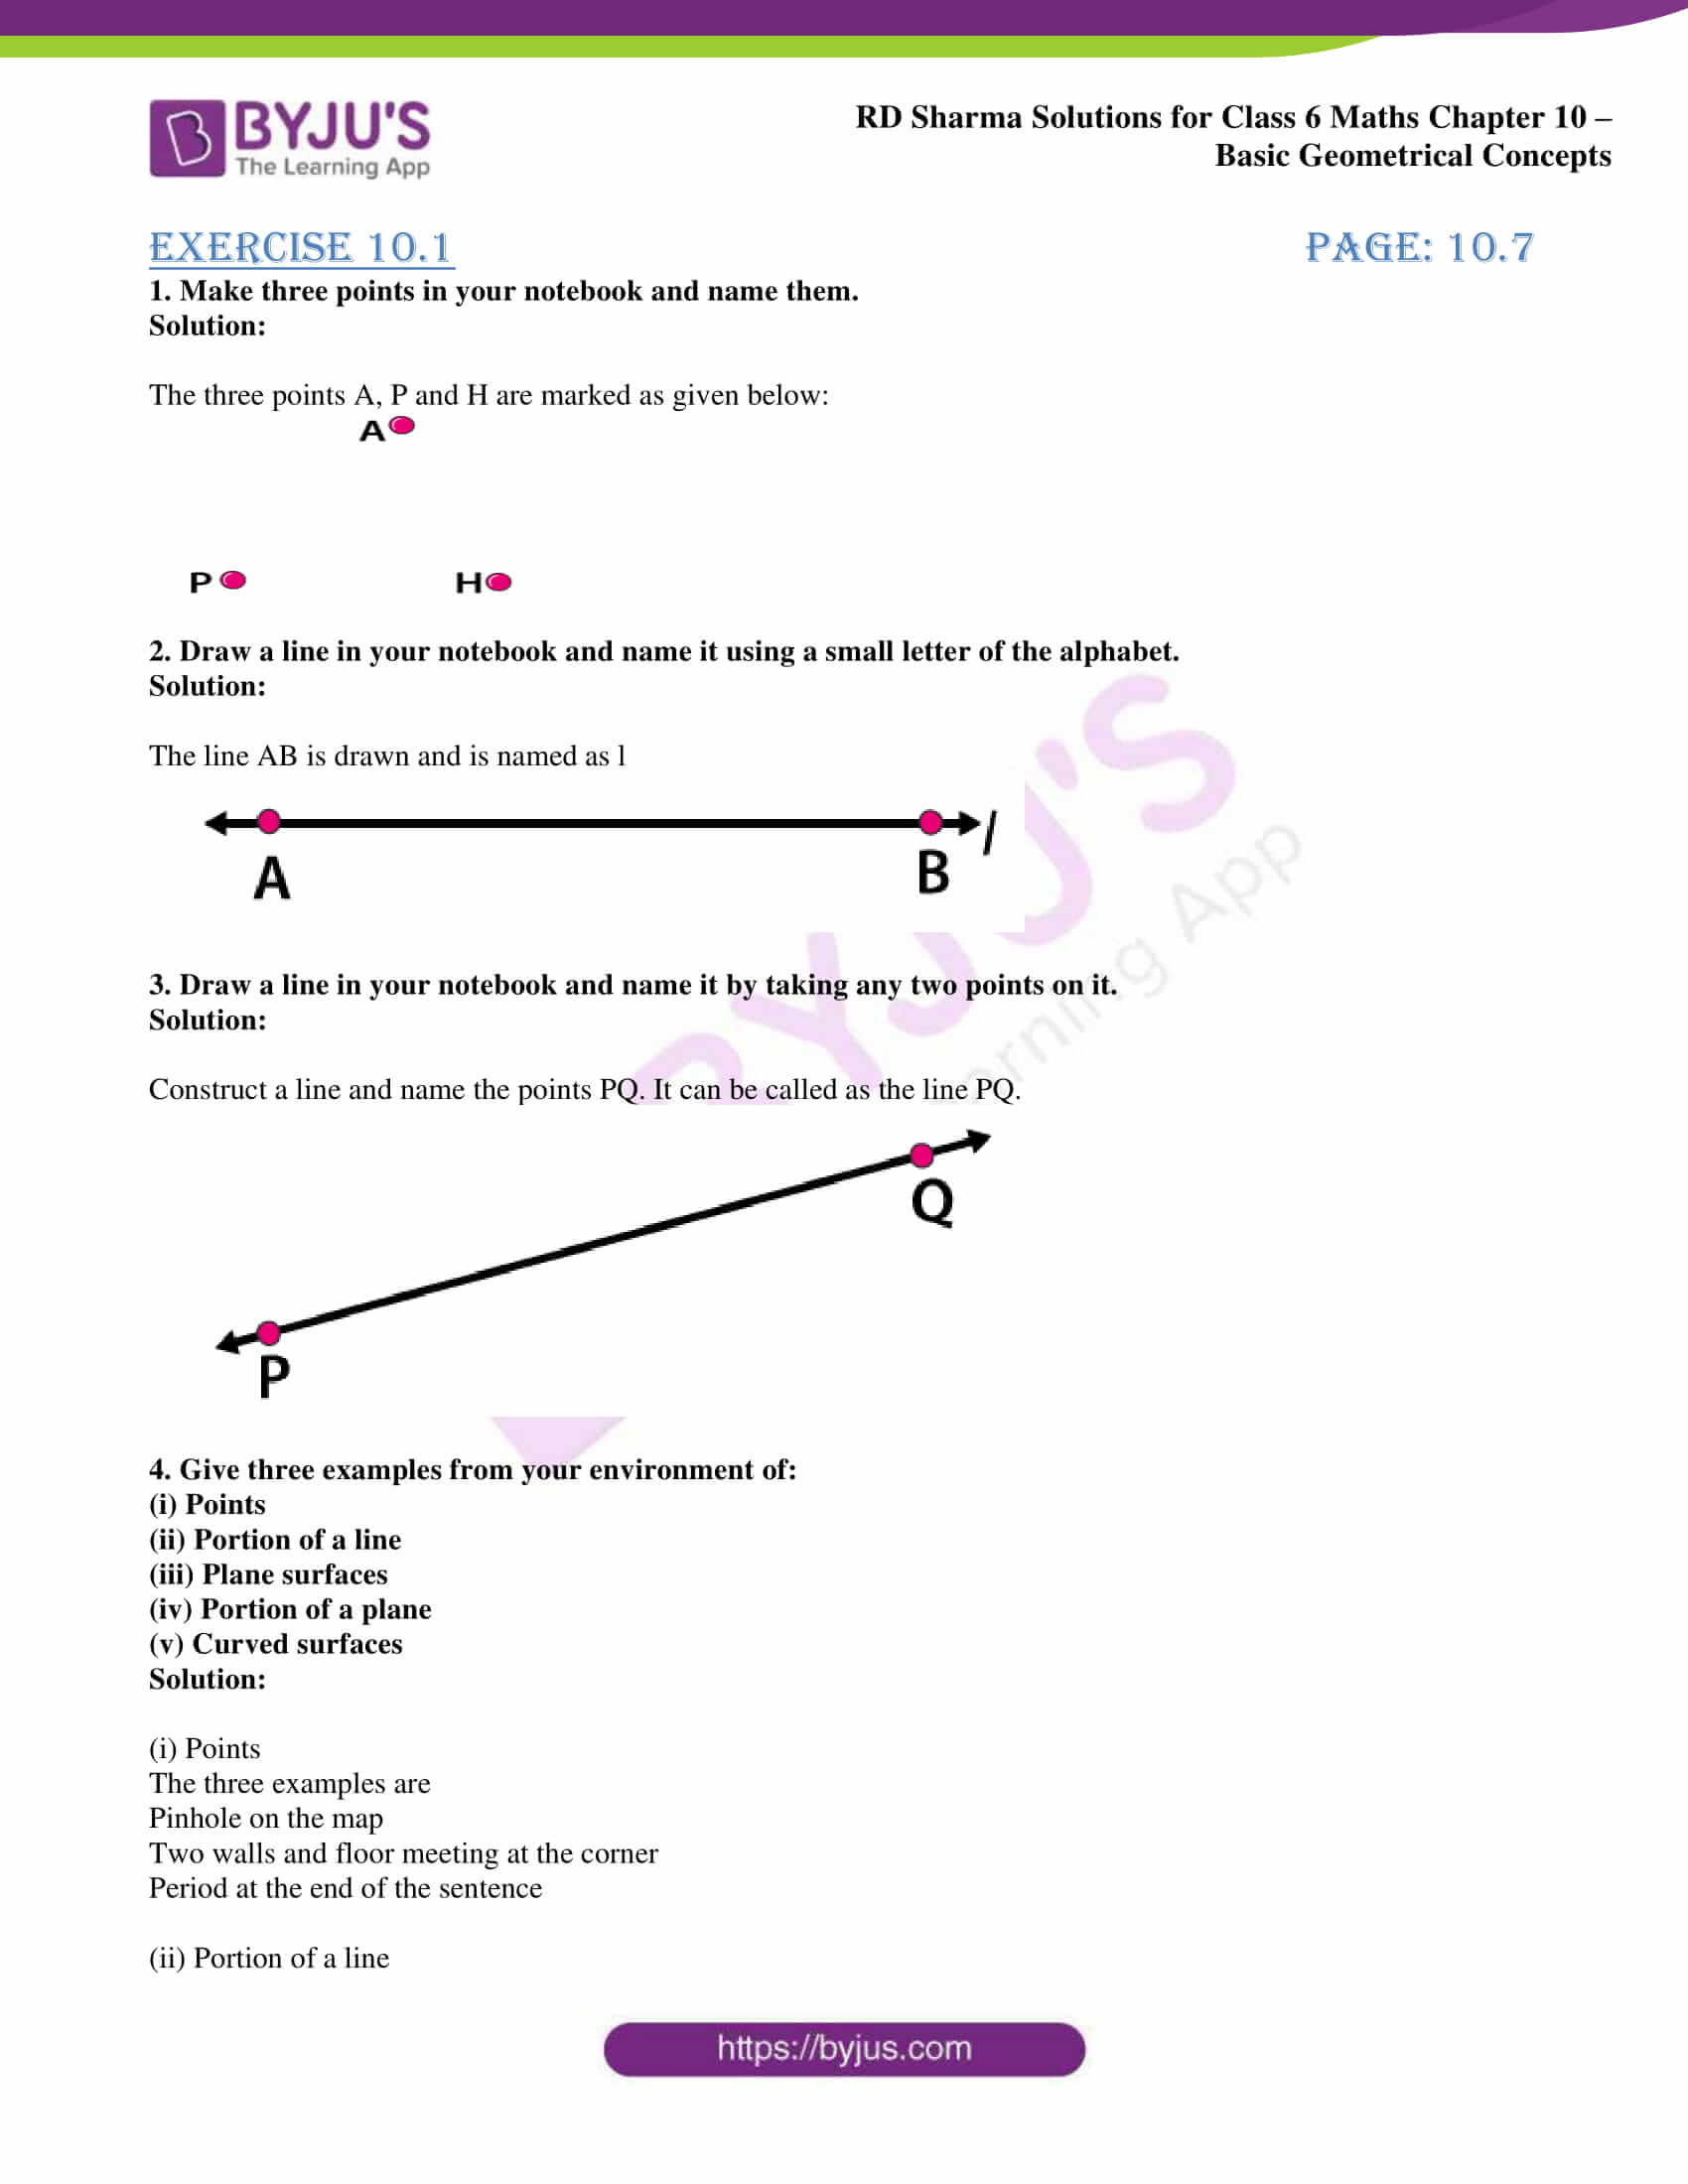 Points Lines and Planes Worksheet Rd Sharma solutions for Class 6 Chapter 10 Basic Geometrical